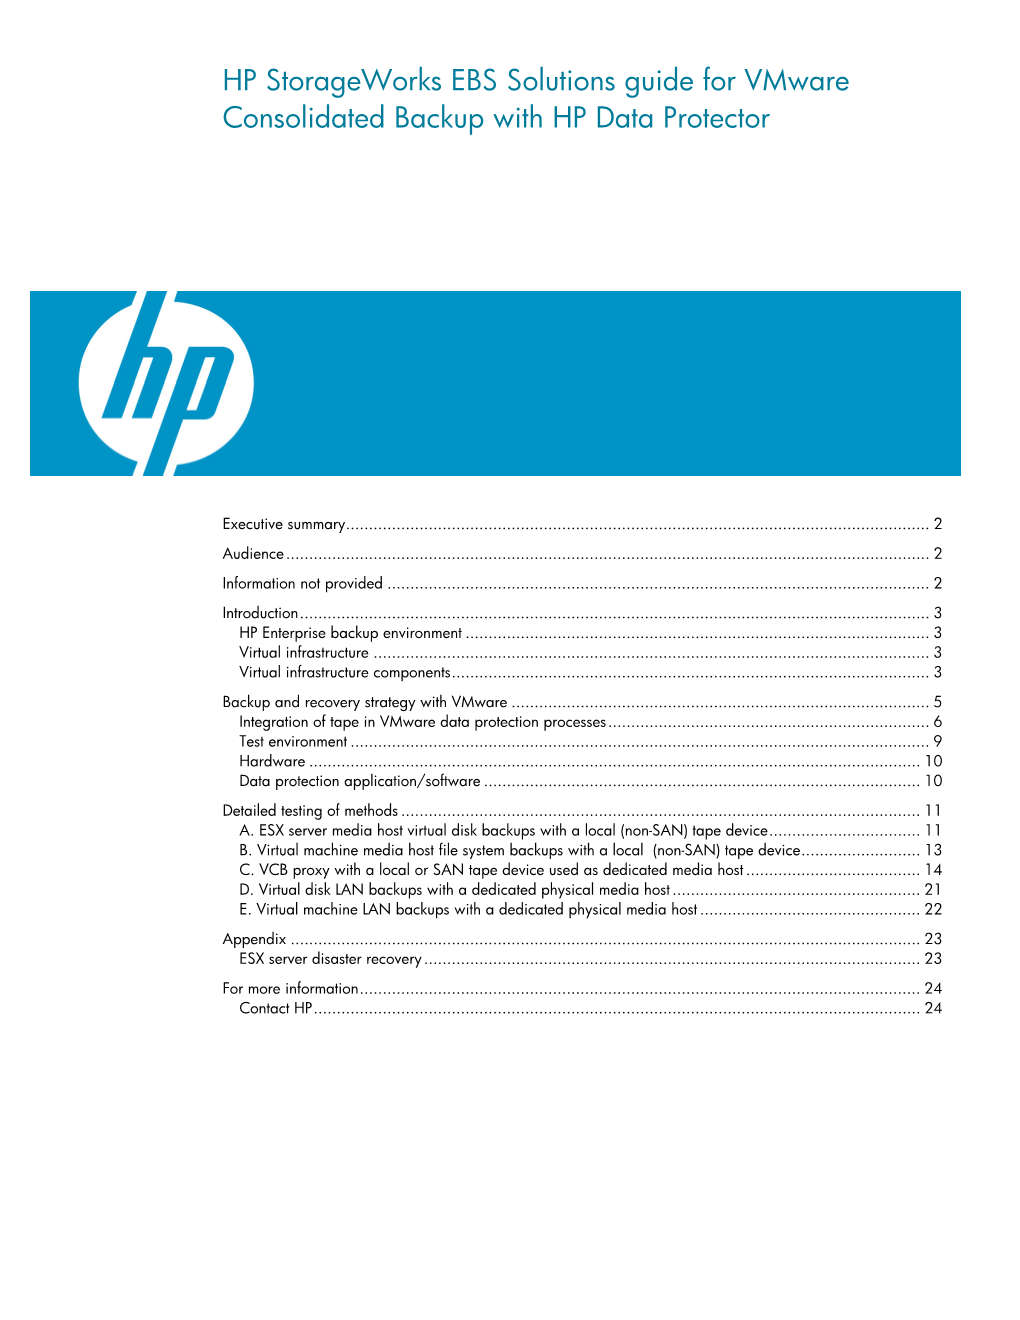 HP Storageworks EBS Solutions Guide for Vmware Consolidated Backup with HP Data Protector